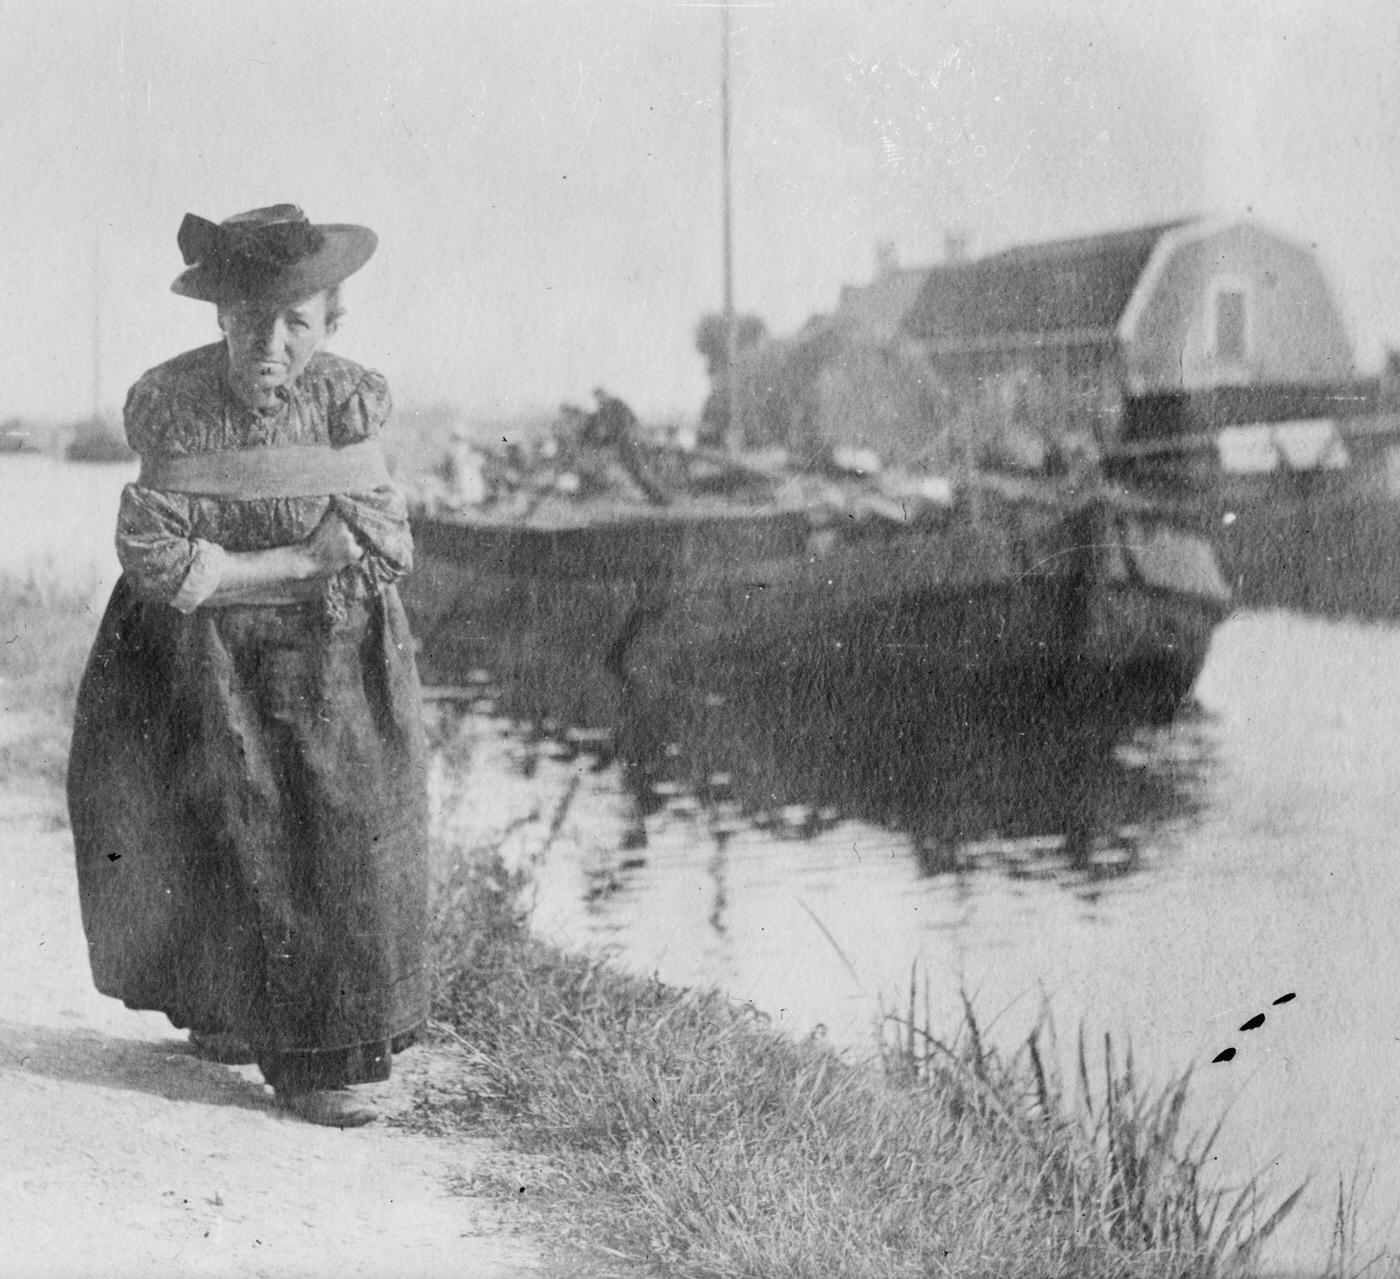 An elderly Dutch woman pulling a barge down a canal, Netherlands, 1900